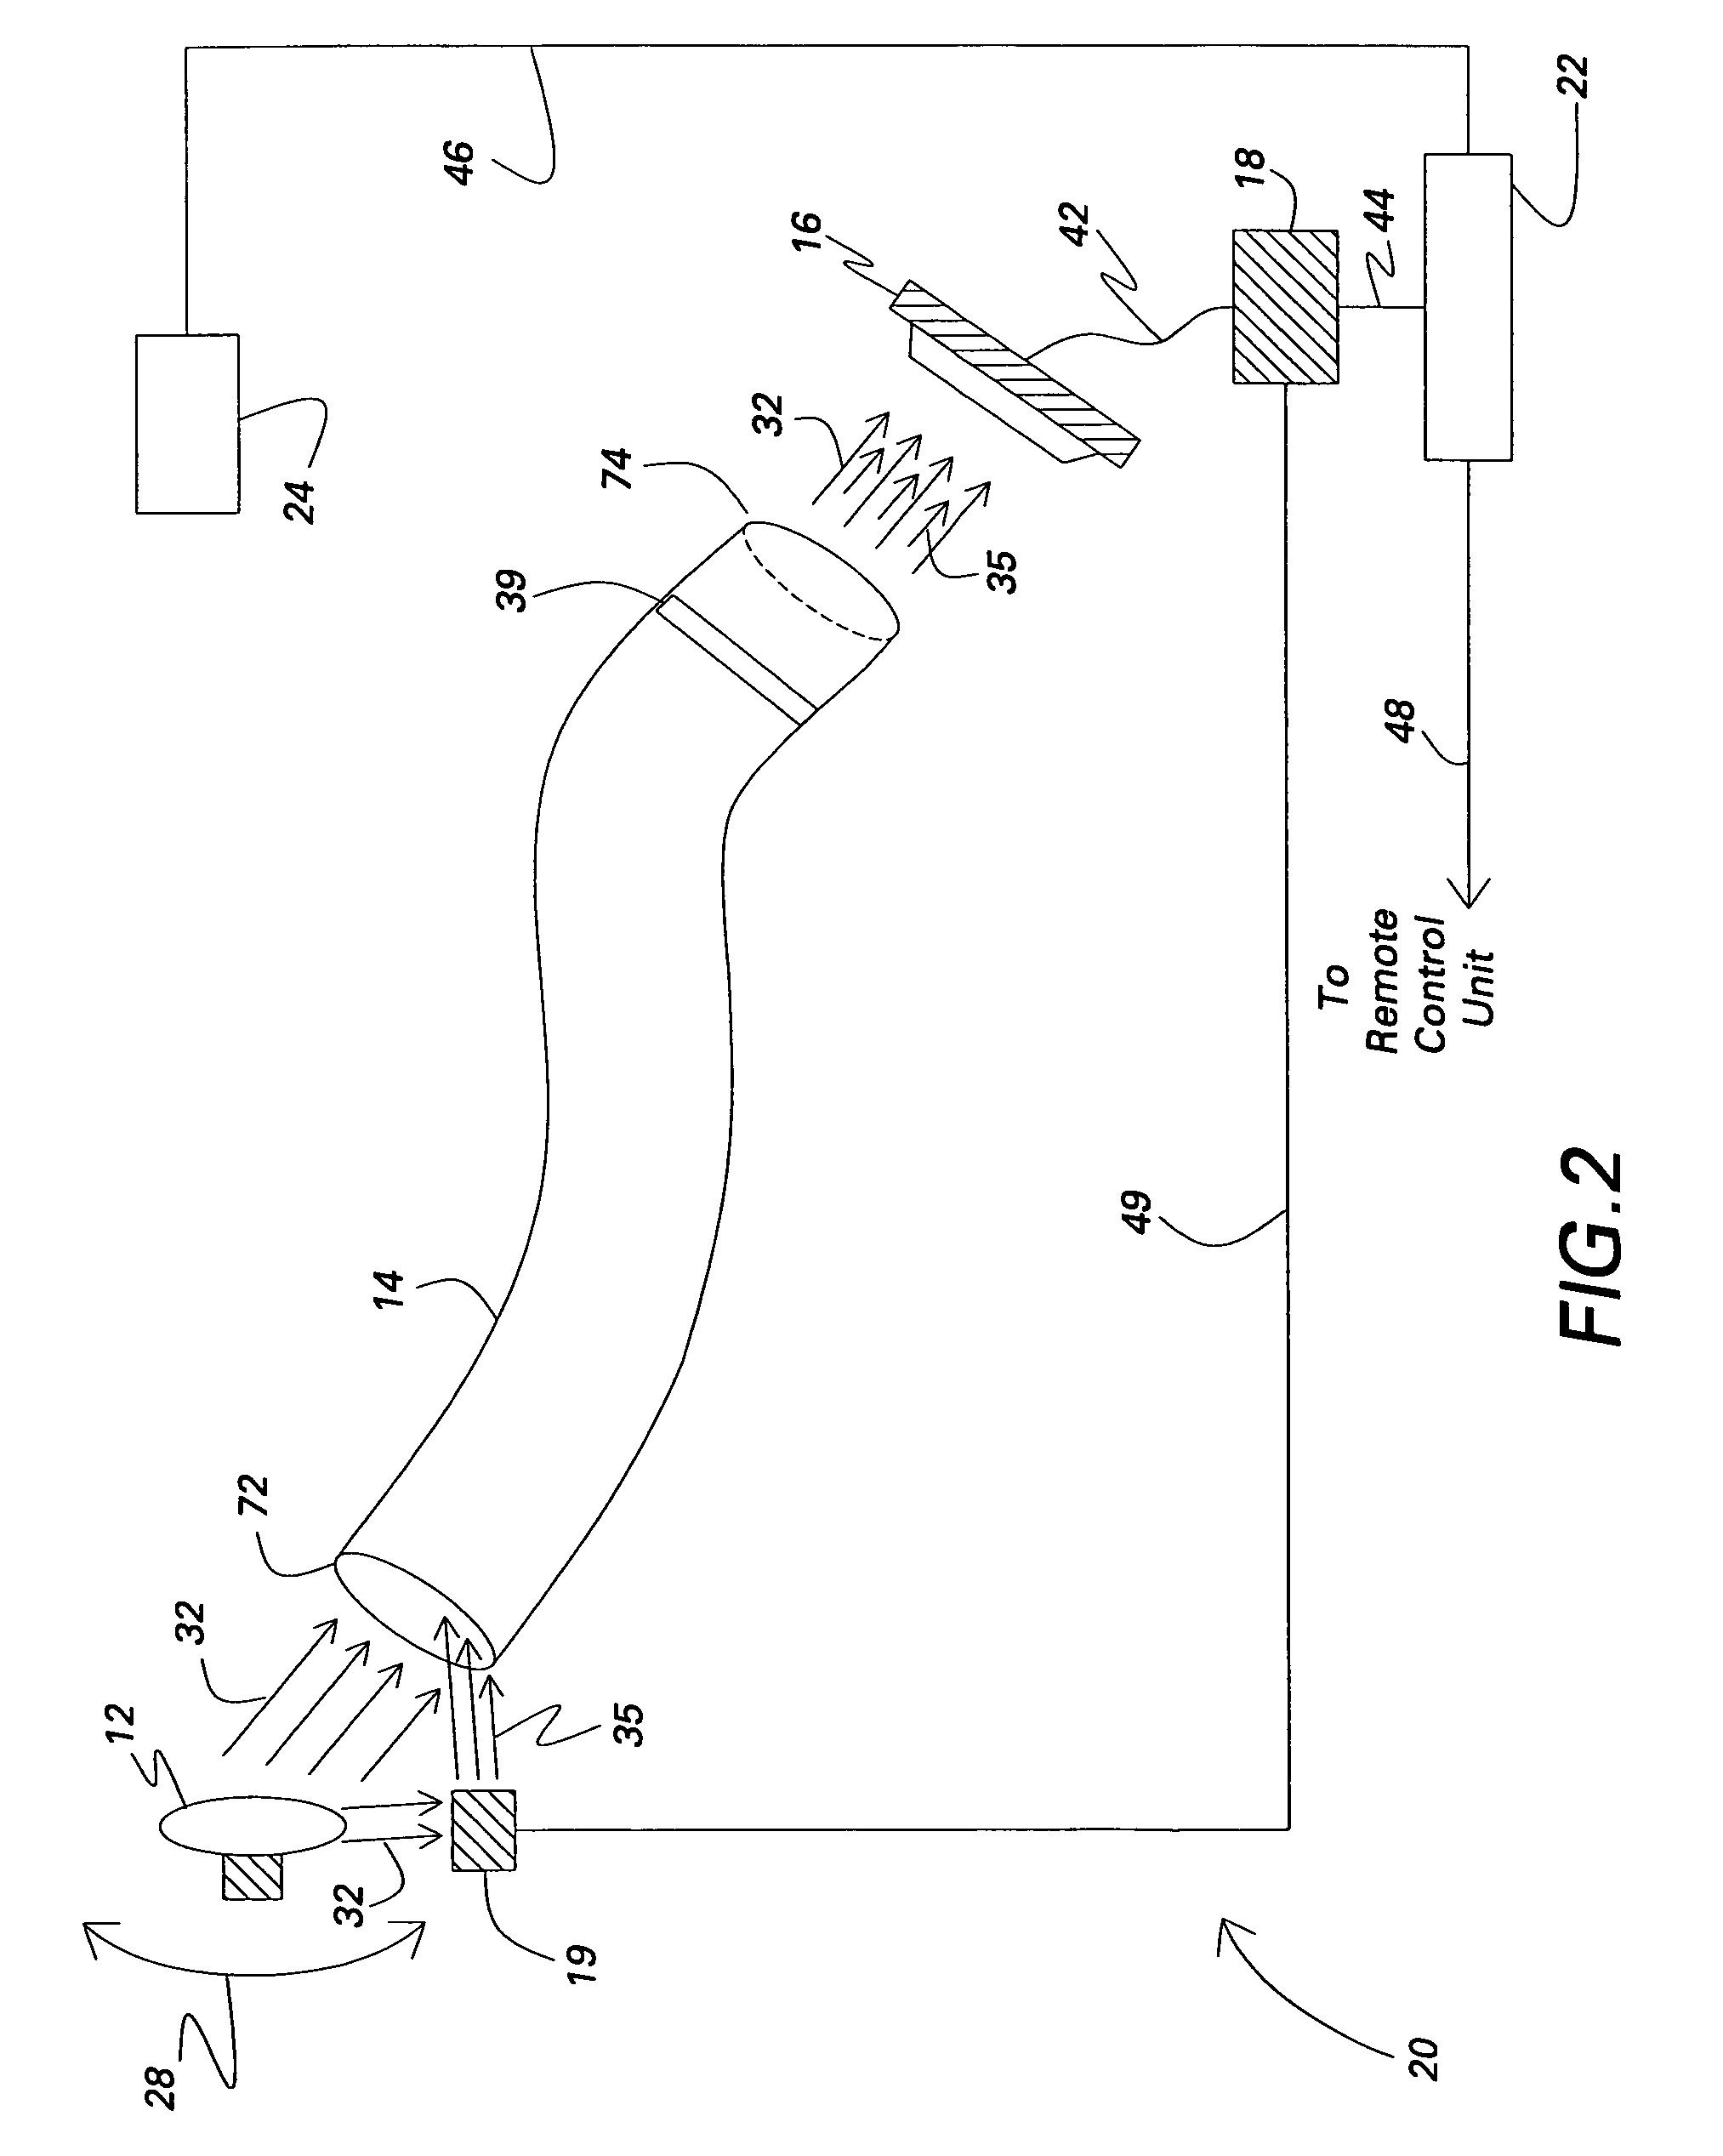 System and method for monitoring status of a visual signal device